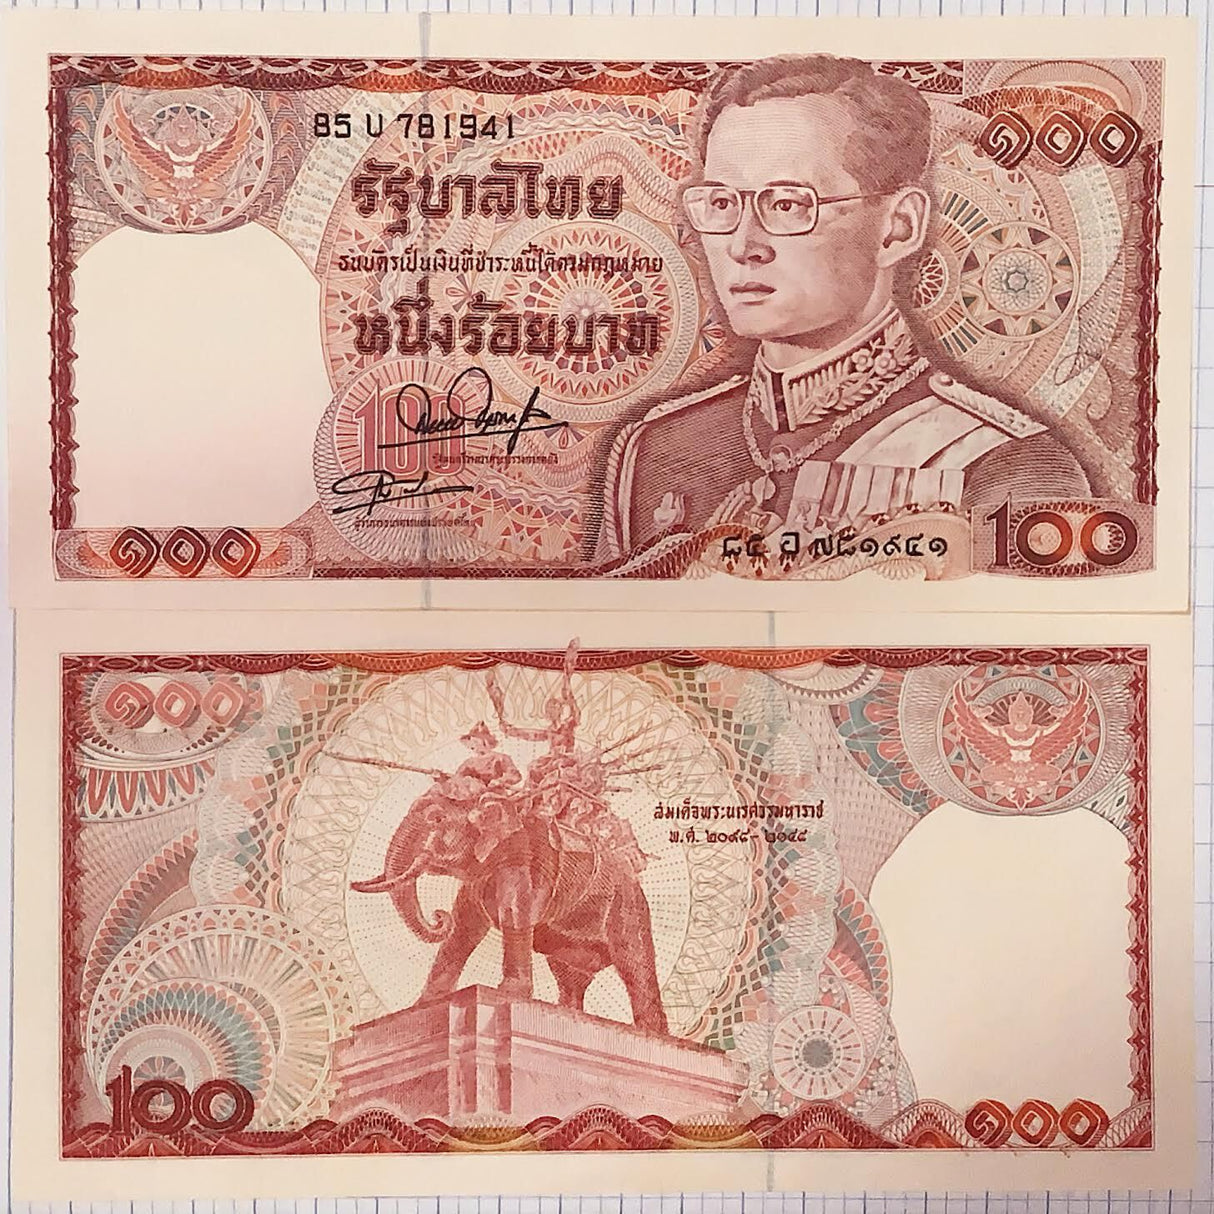 Thailand 100 Baht ND 1978 P 89 Sign 54 With 6 Digit UNC